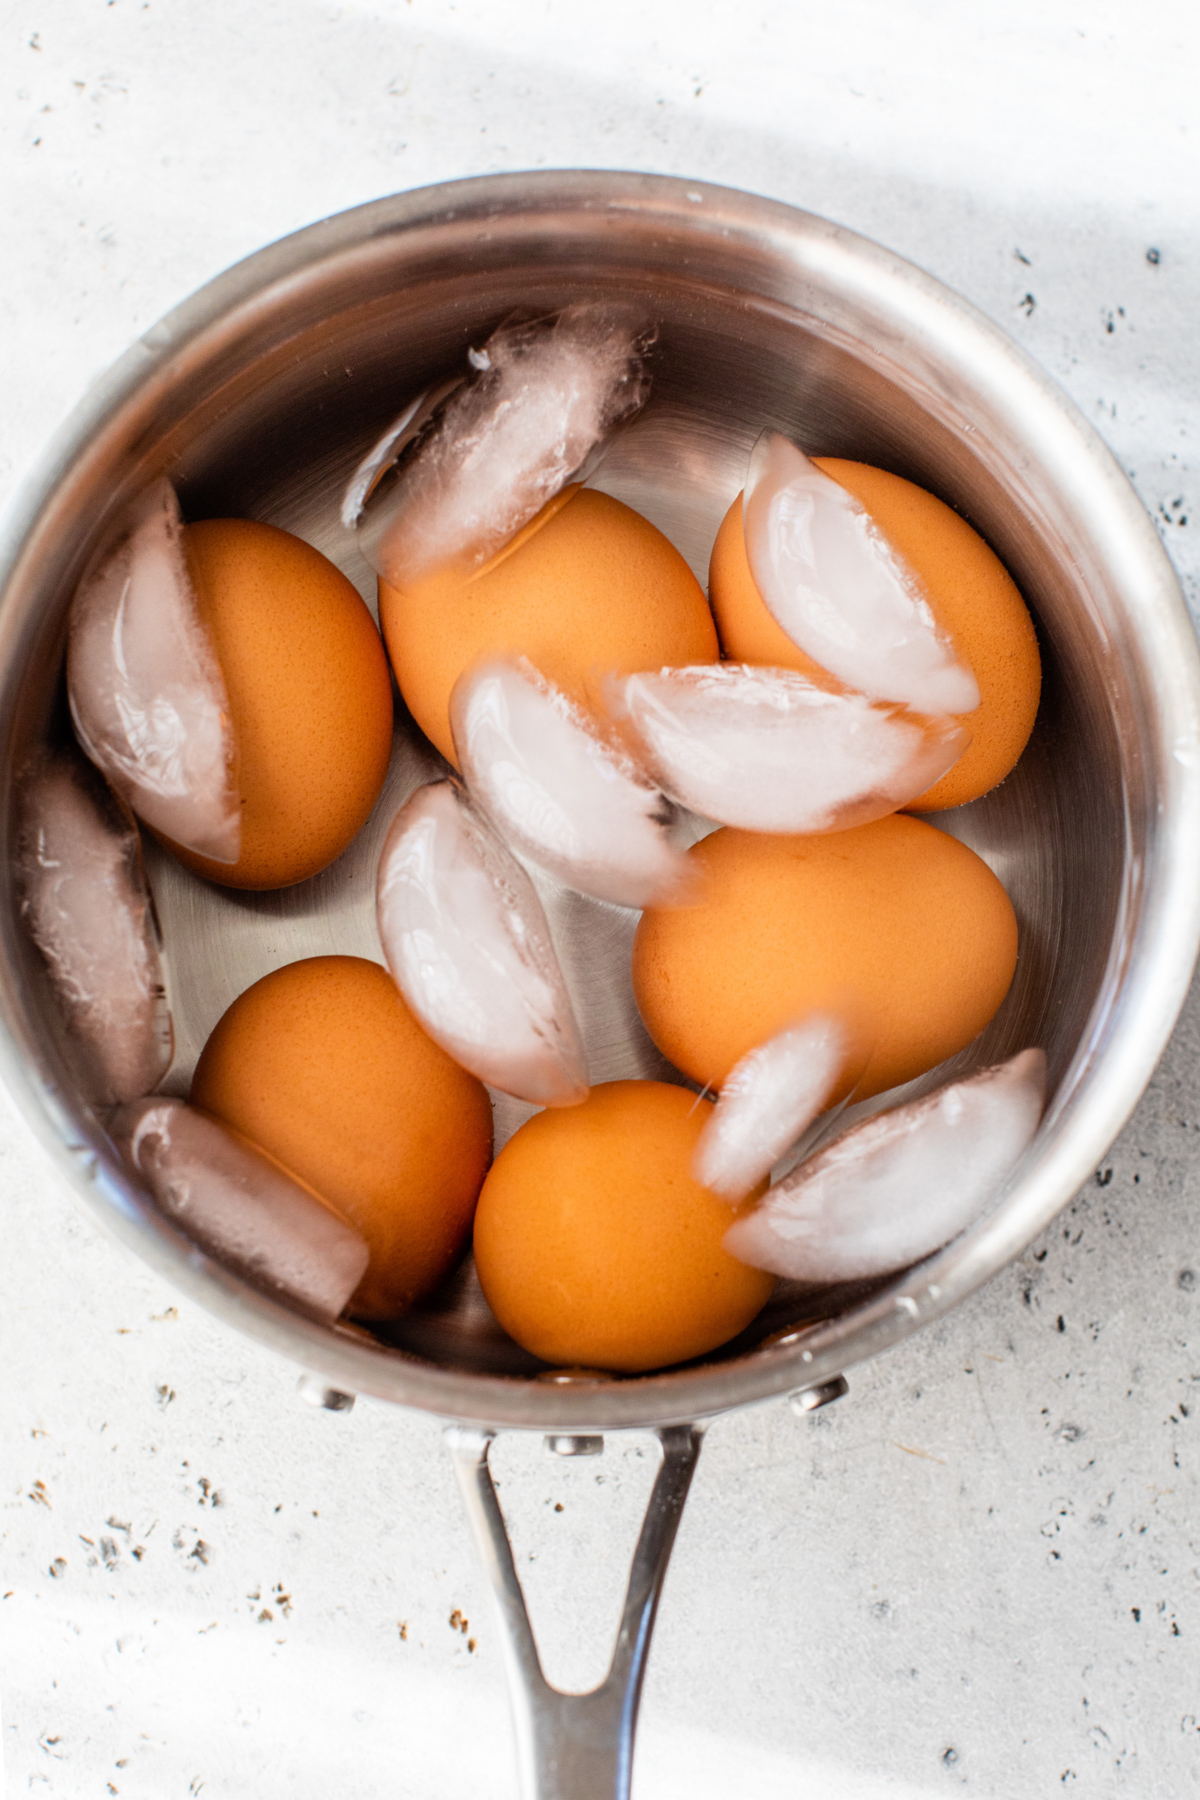 Cold water and ice cubes added to a pot of hard oiled eggs to help them cool